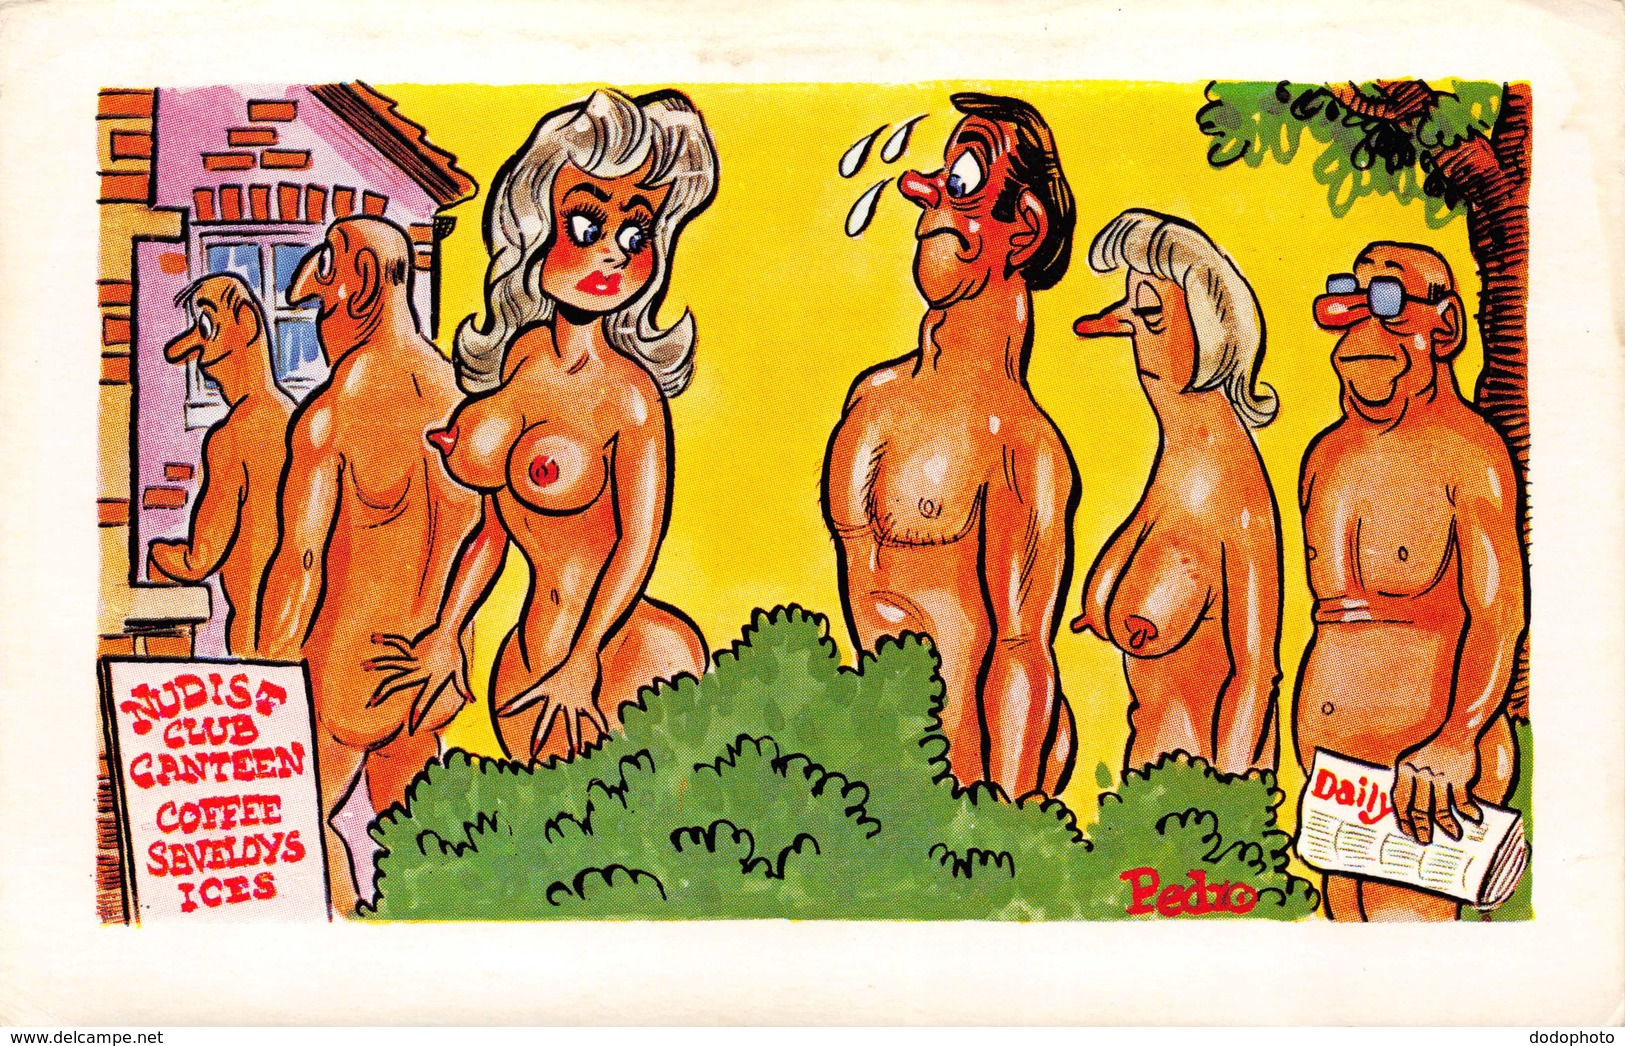 R081930 Nudist Club Canteen Coffee Seveloys Ices. Sunny Pedro Series. 179 - Unclassified